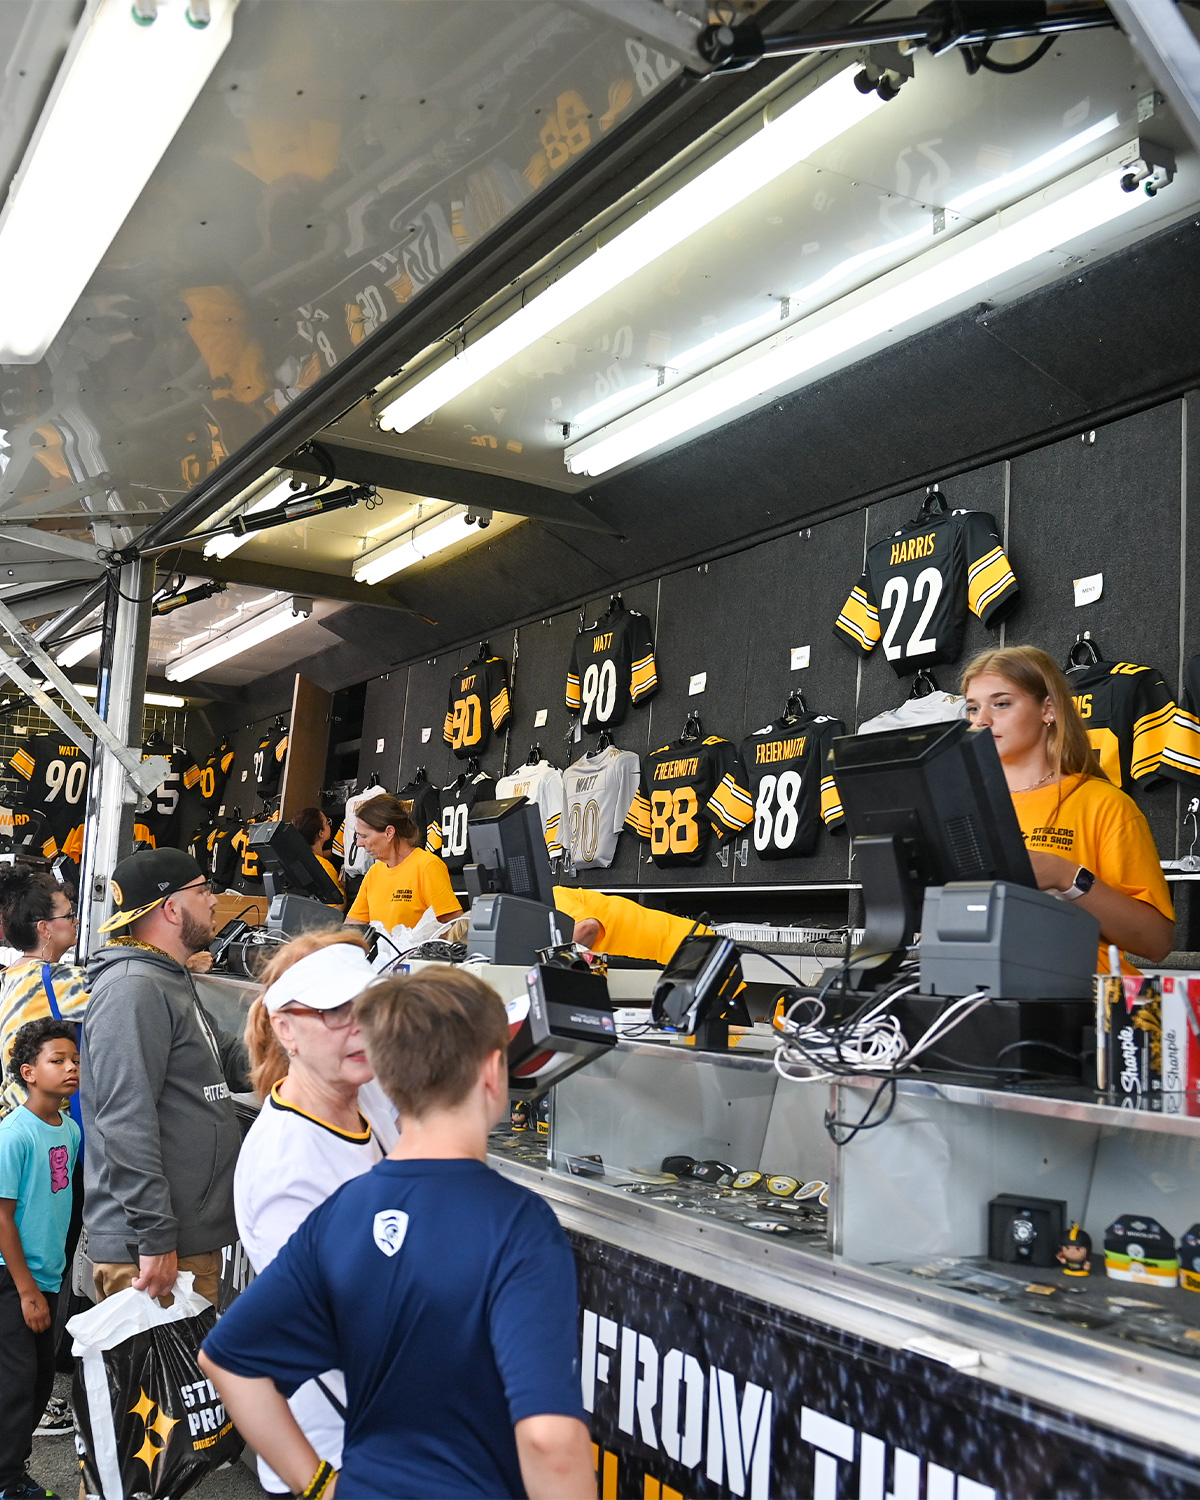 Steelers Pro Shop on X: When you get to Saint Vincent College today for  Back Together Saturday, don't forget to check out the Steelers Pro Shop  Tent at the #Steelers Experience! #SteelersCamp